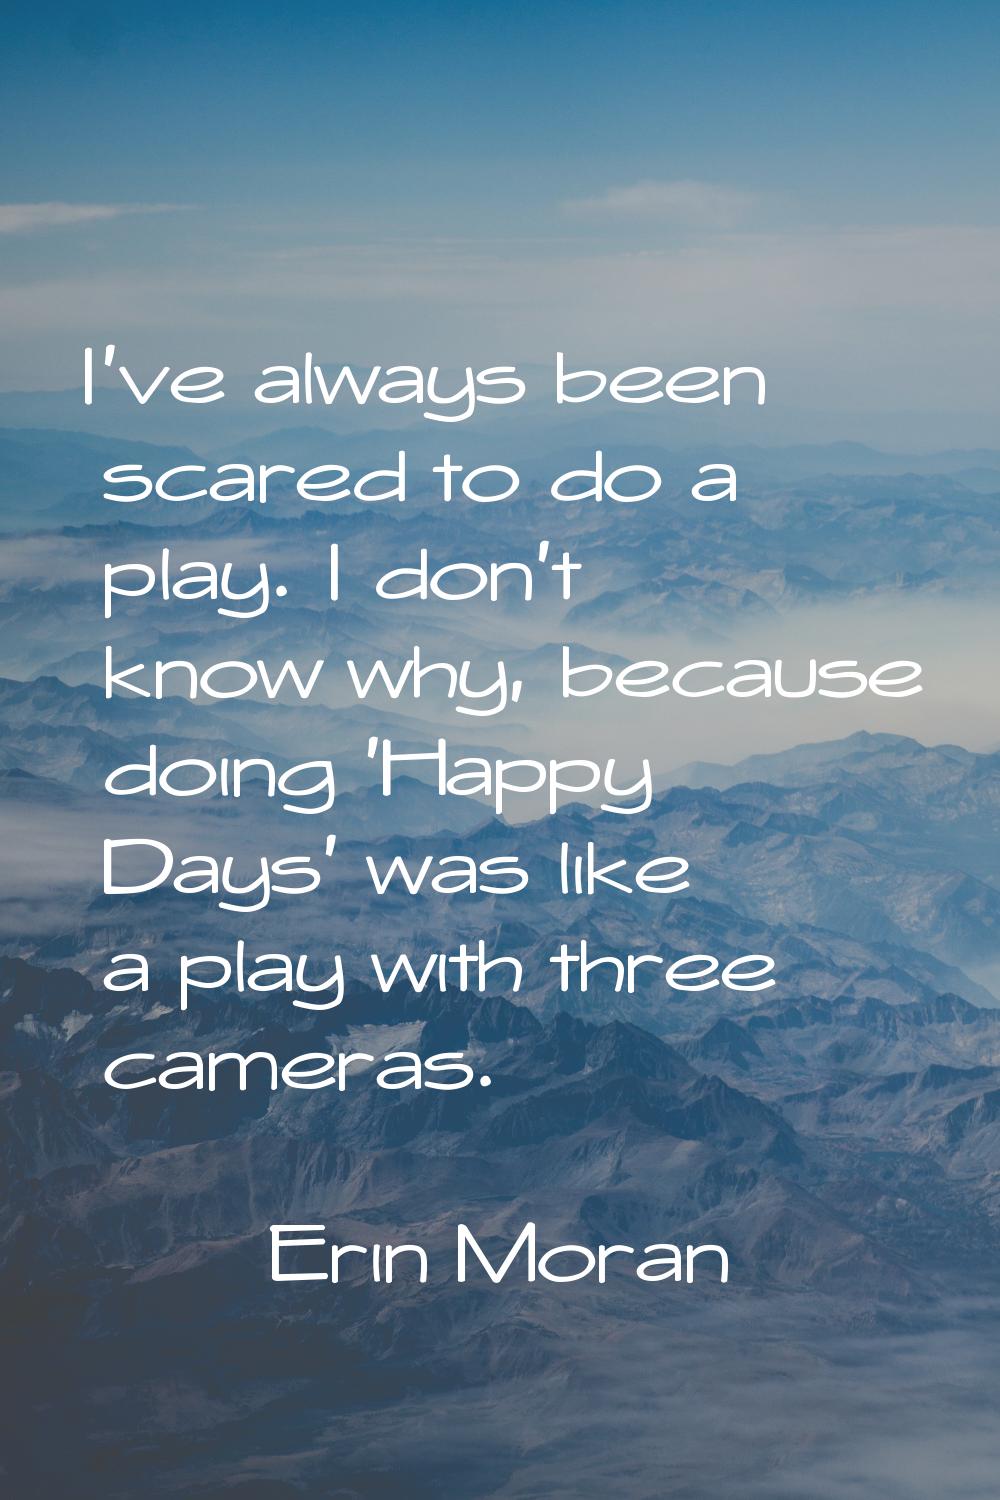 I've always been scared to do a play. I don't know why, because doing 'Happy Days' was like a play 